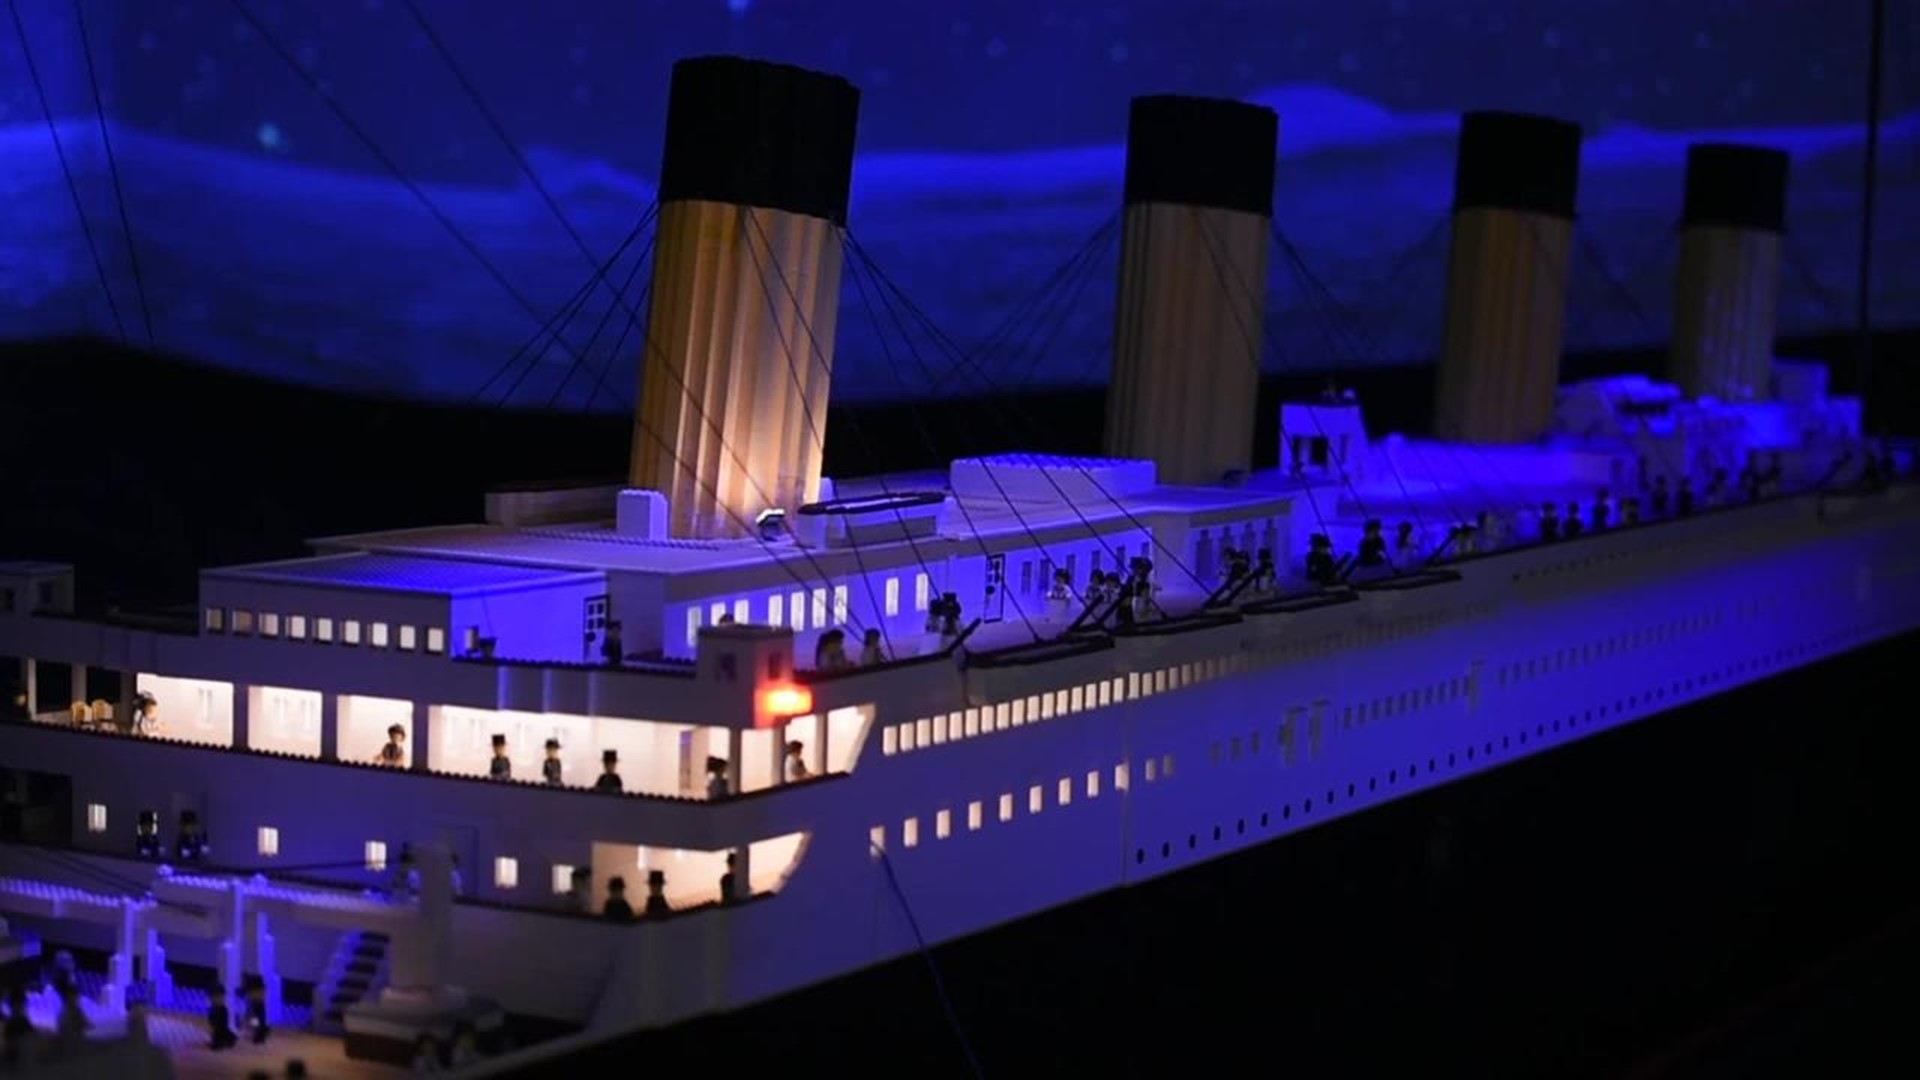 Massive Lego replica of Titanic built by boy with autism finds home in Forge 13wmaz.com